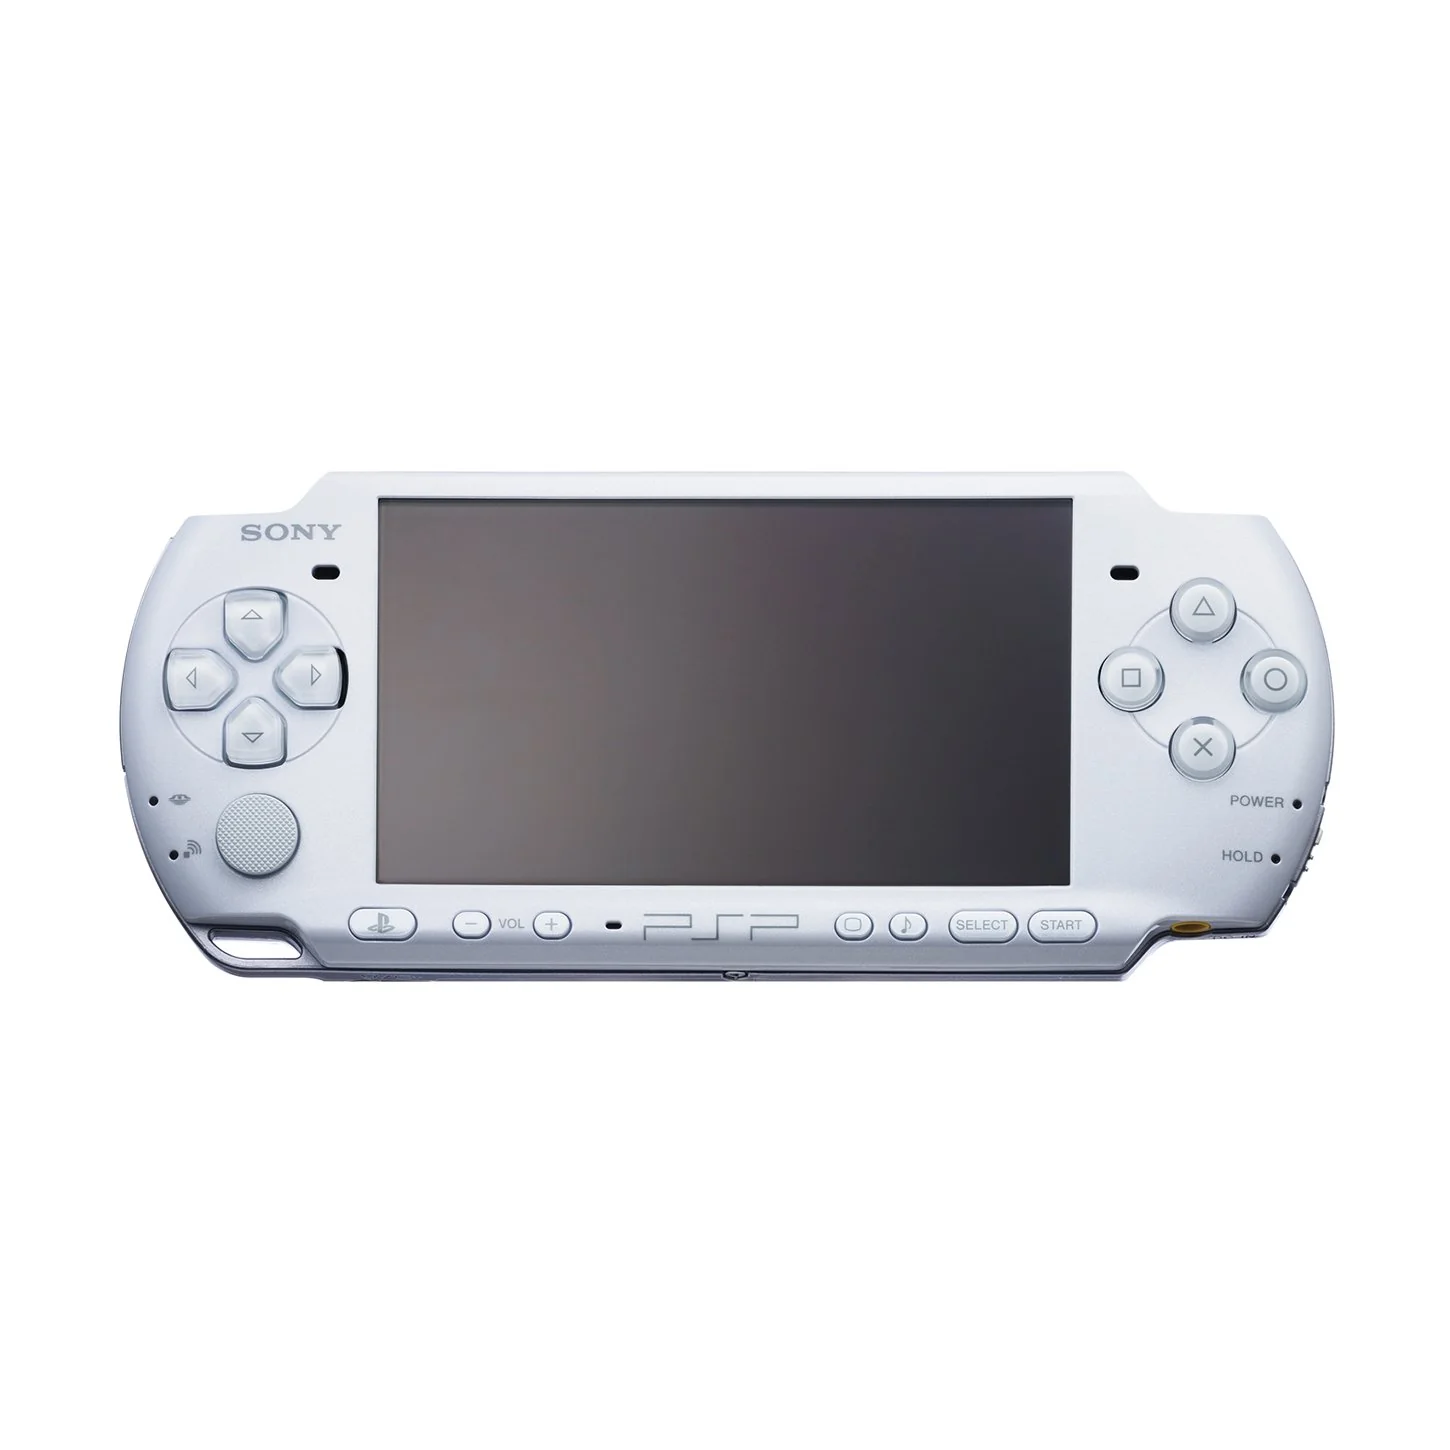 Sony PlayStation Portable Pearl White Model 3000 Handheld Console